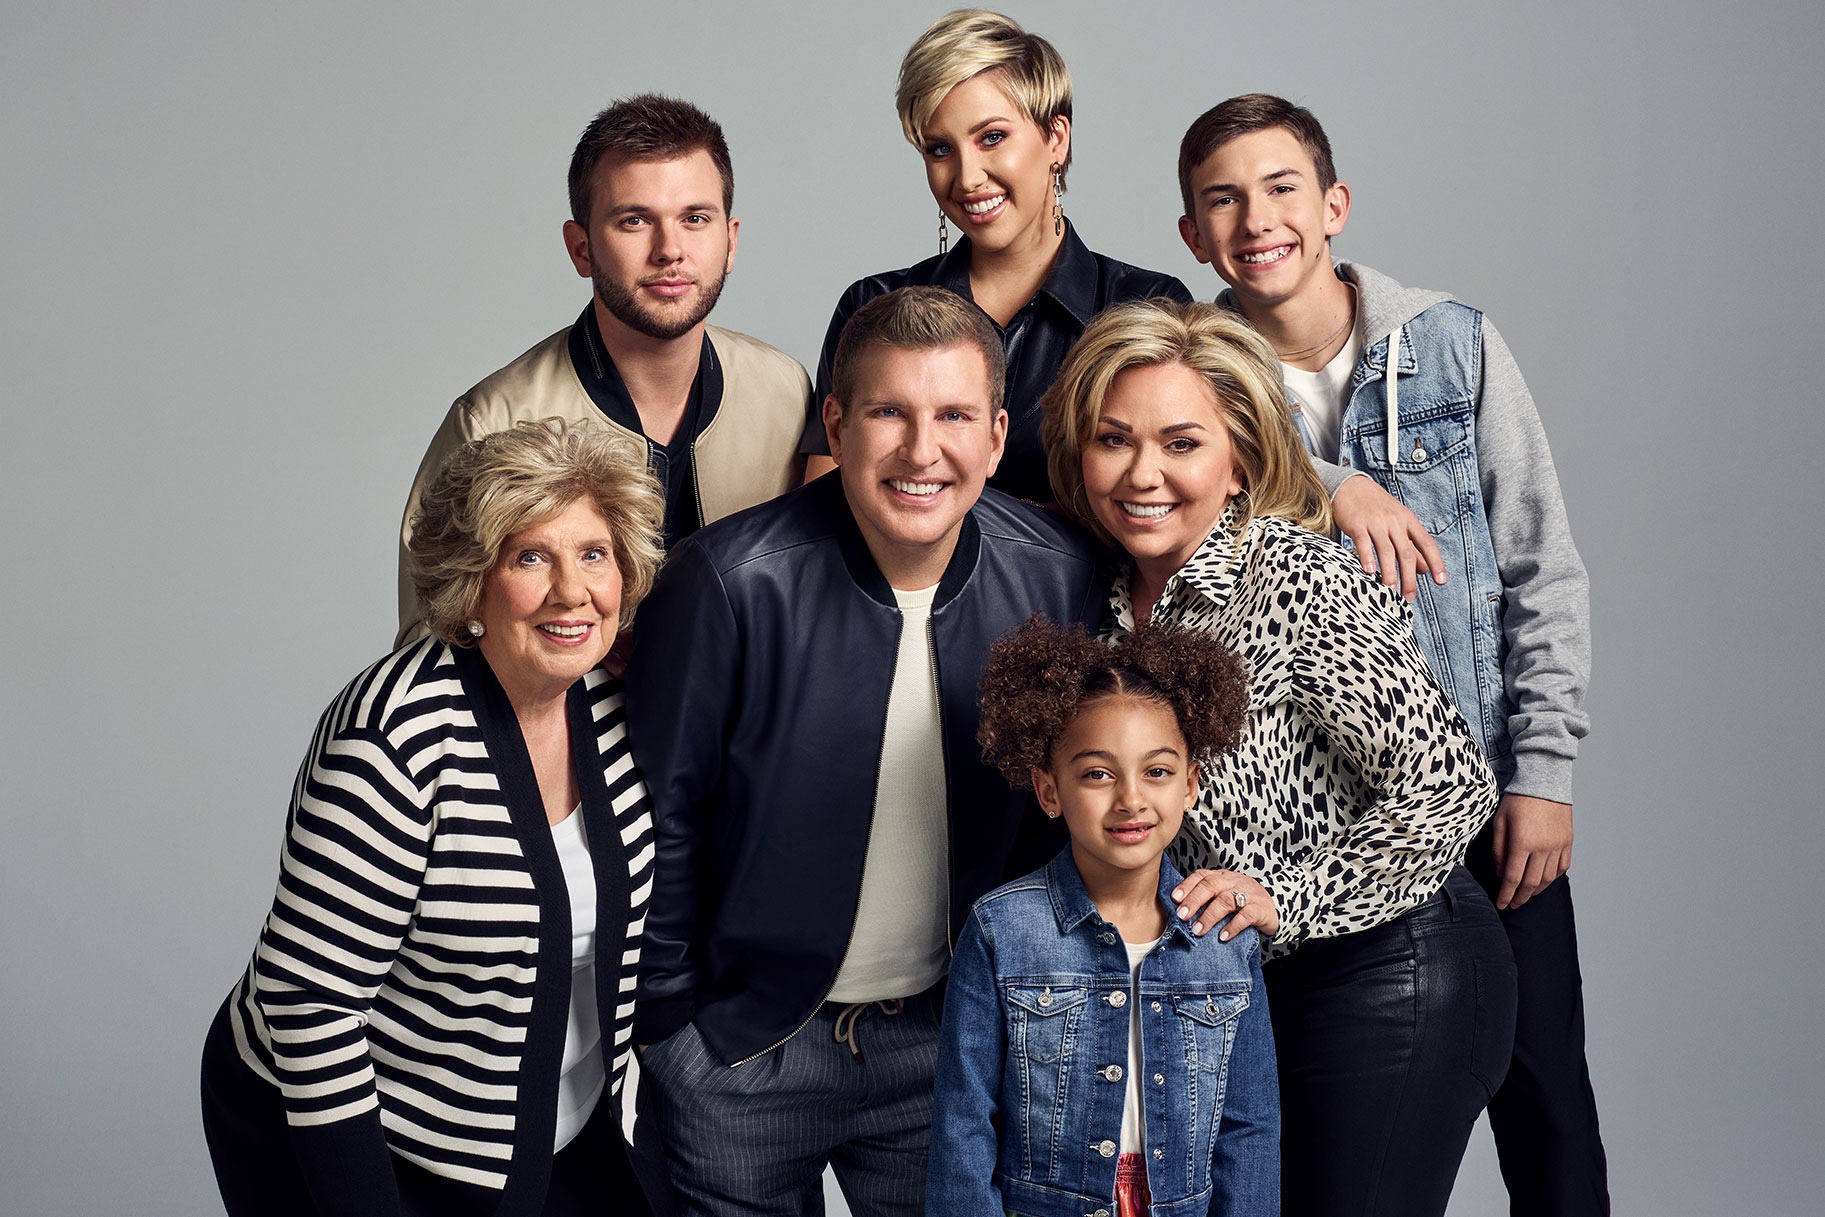 Chrisley Knows Best Daughter Dies: Tragedy Strikes the Chrisley Family